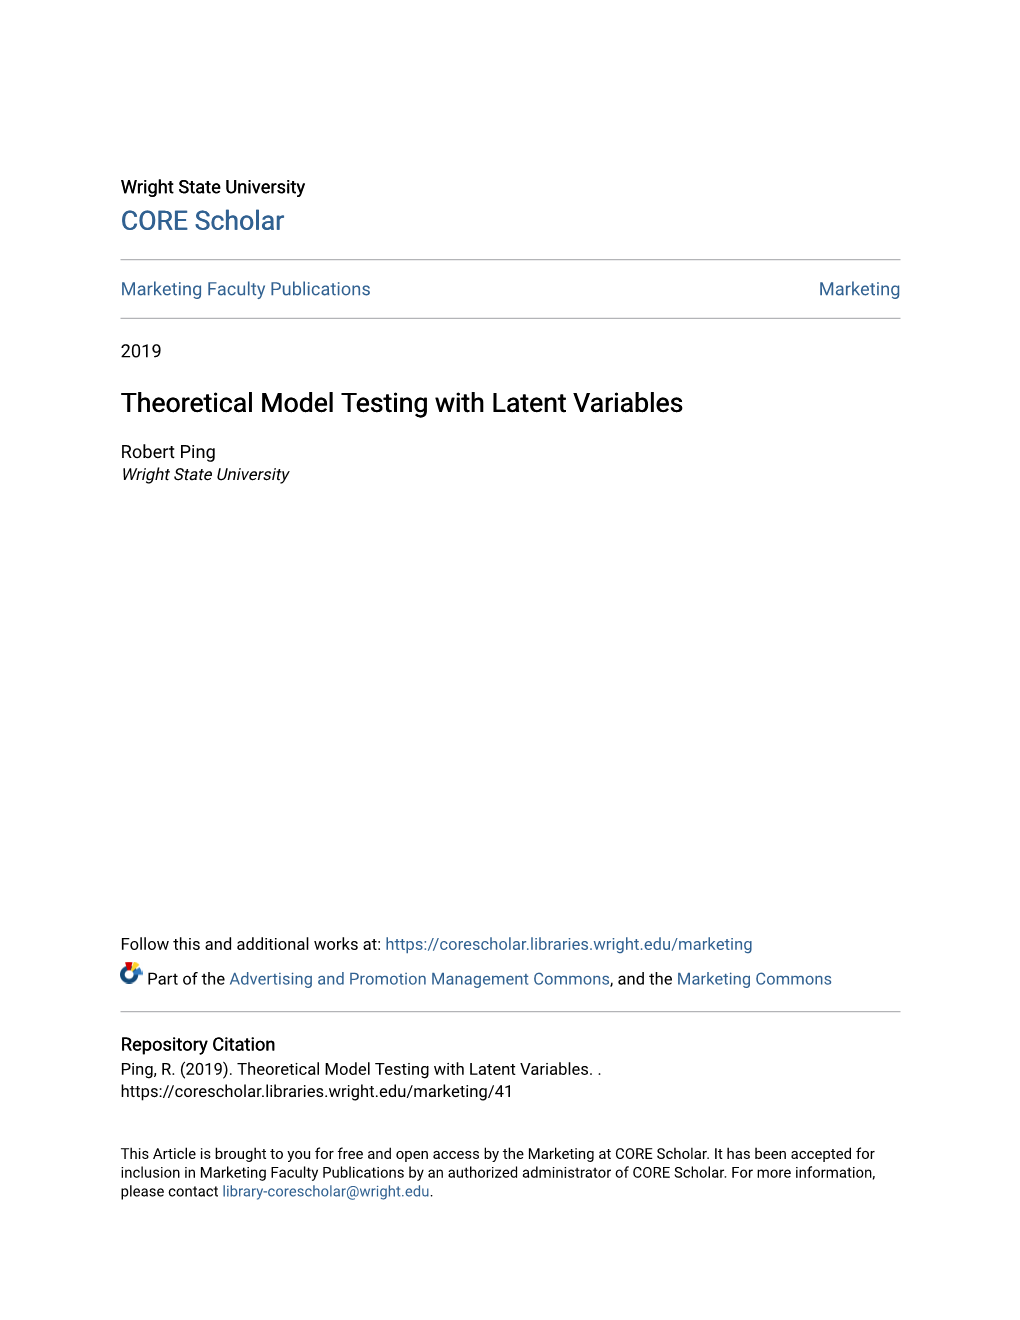 Theoretical Model Testing with Latent Variables